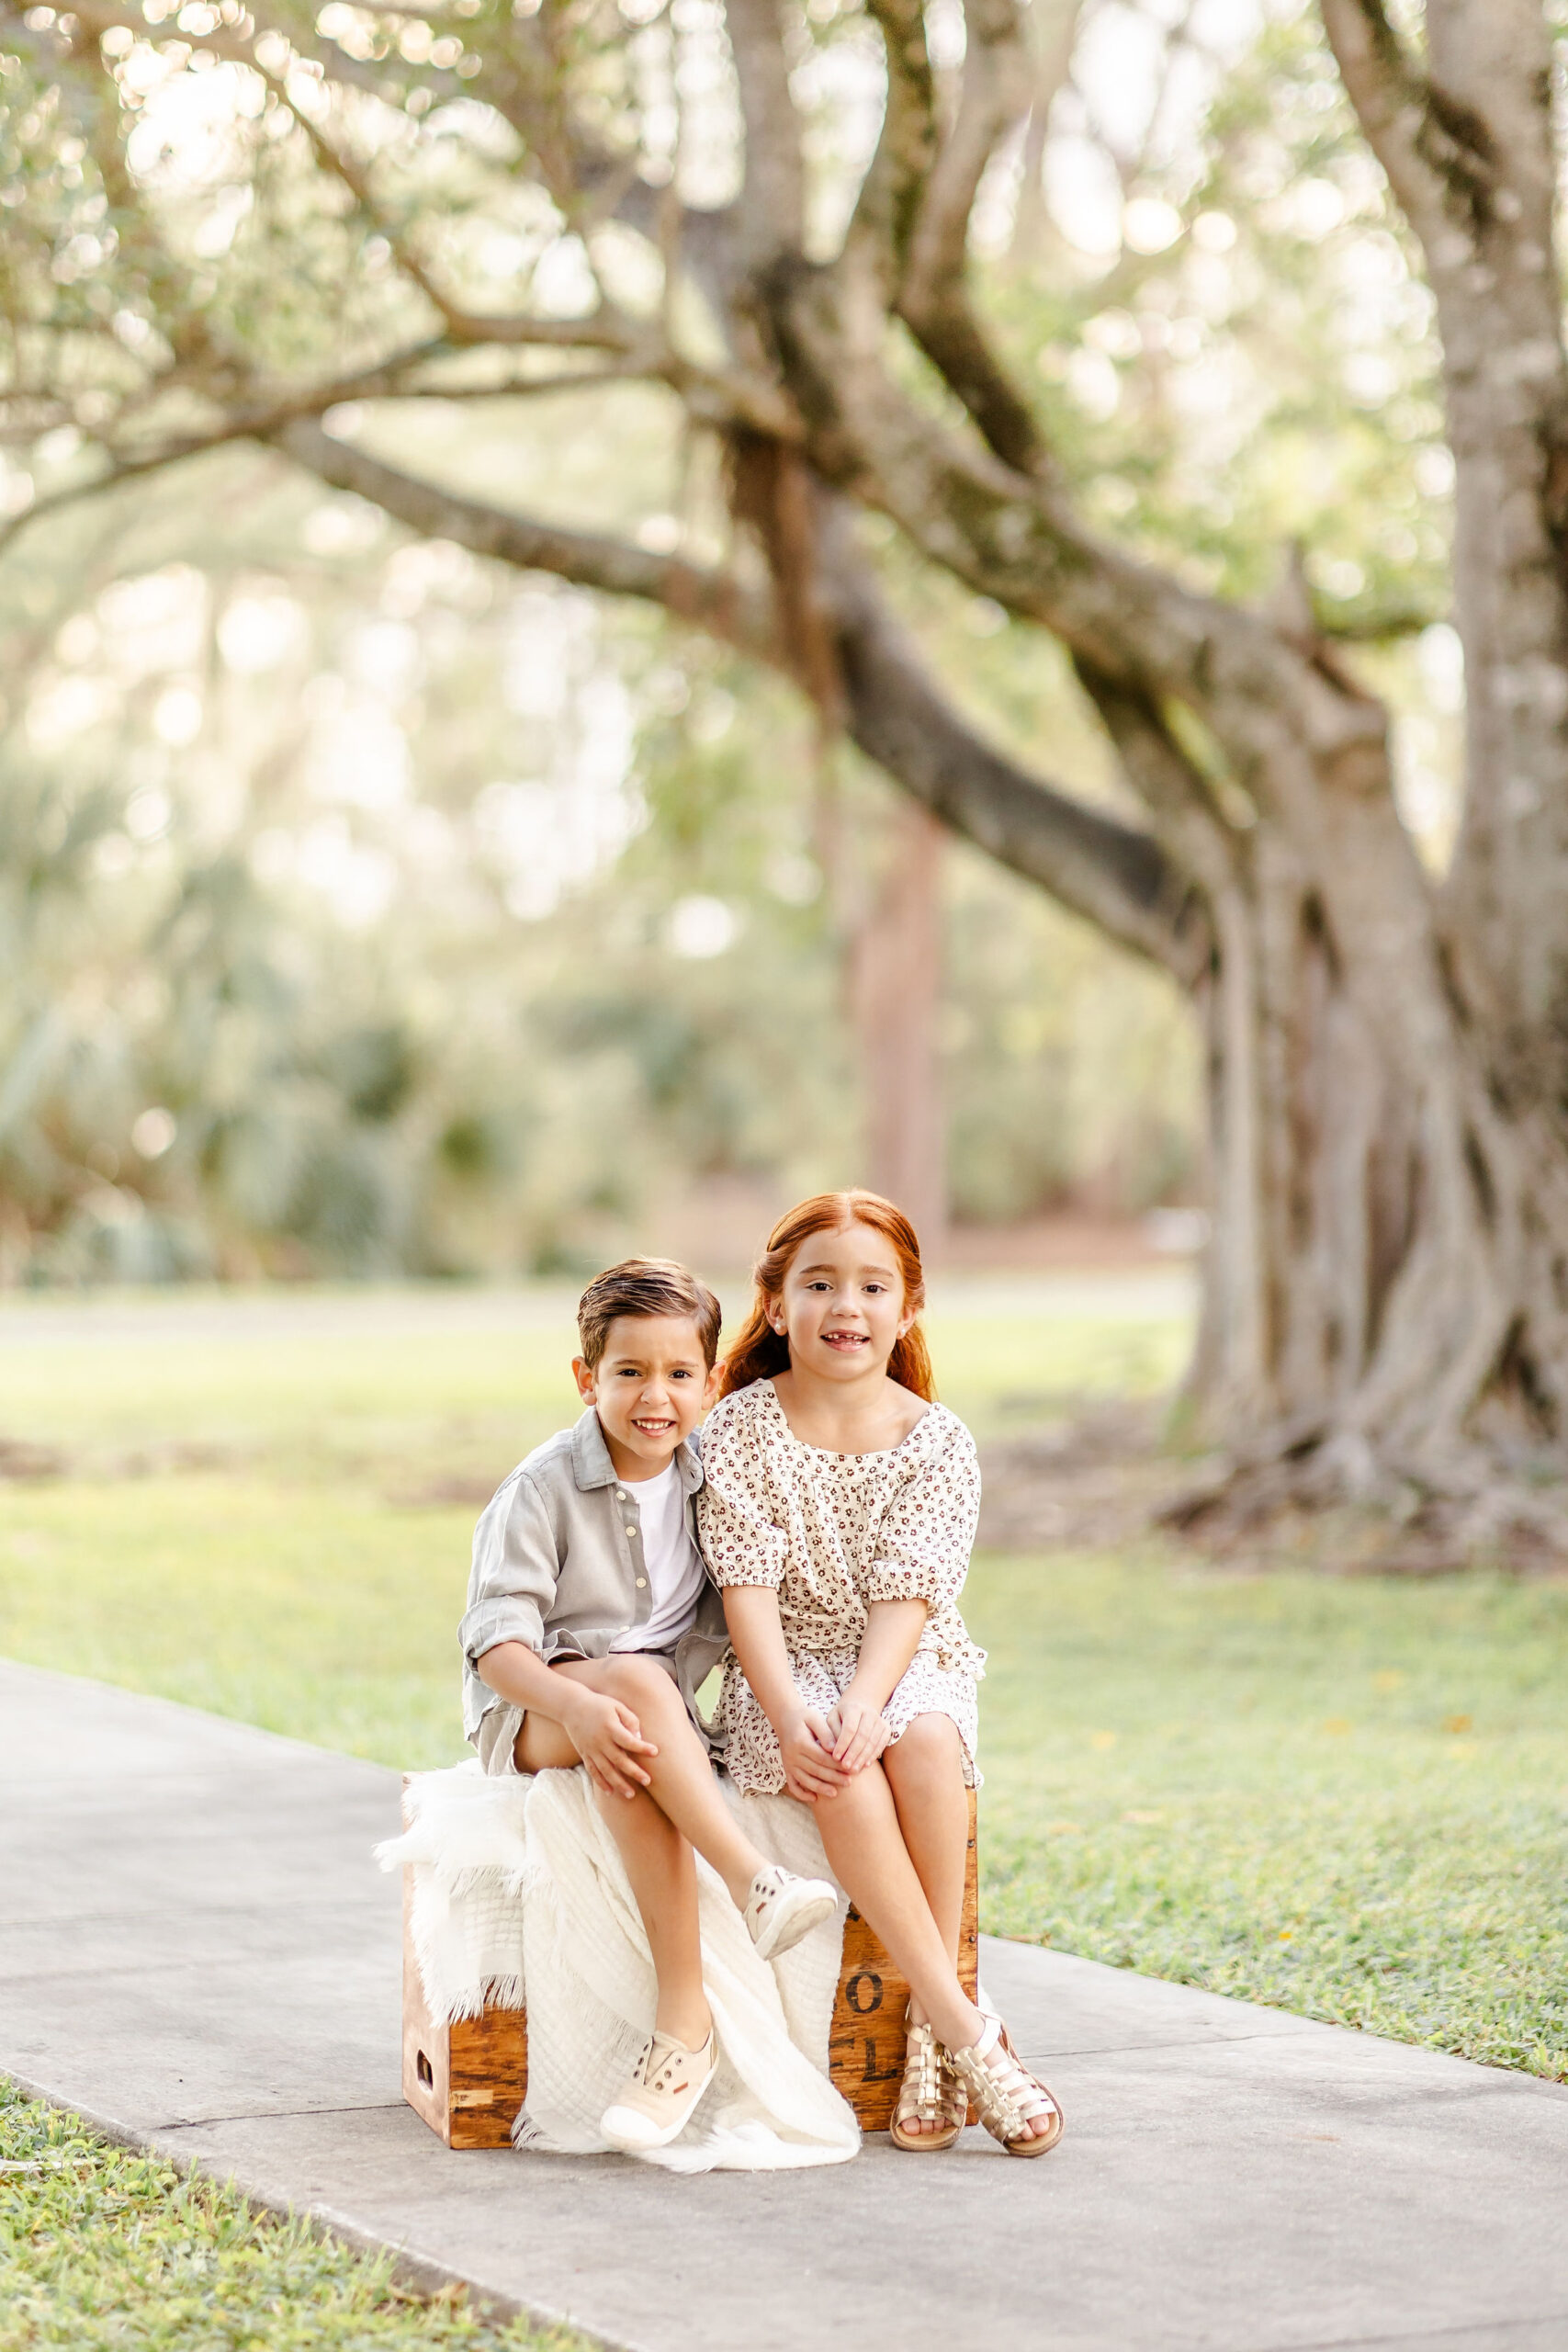 A young boy sits on a wooden box with his sister in a park sidewalk at sunset